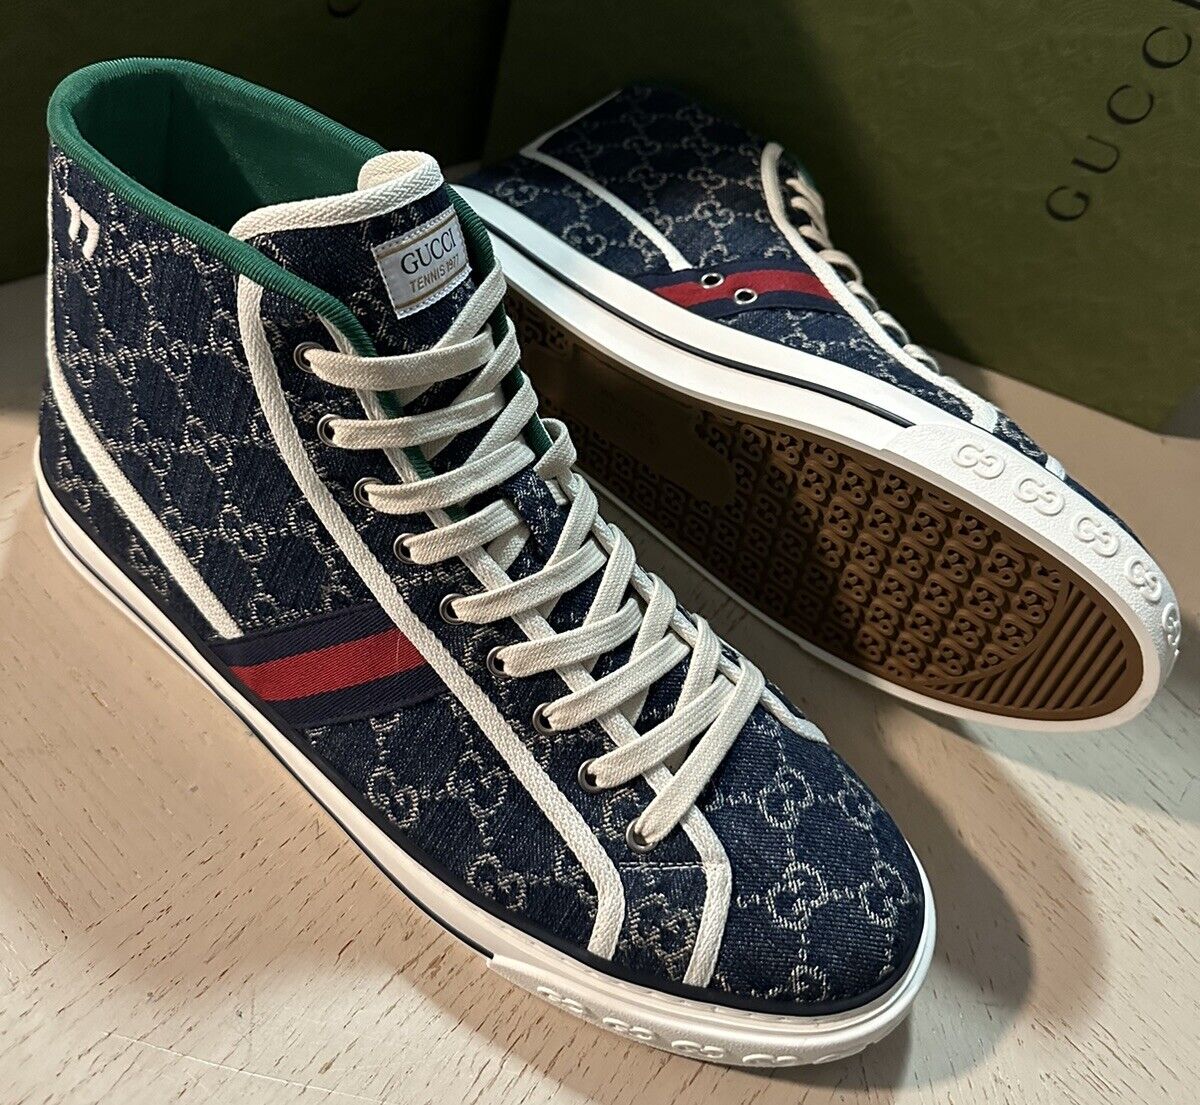 New Gucci Men GG Logo Canvas High-top Sneakers Blue 13 US/12.5 UK 625807